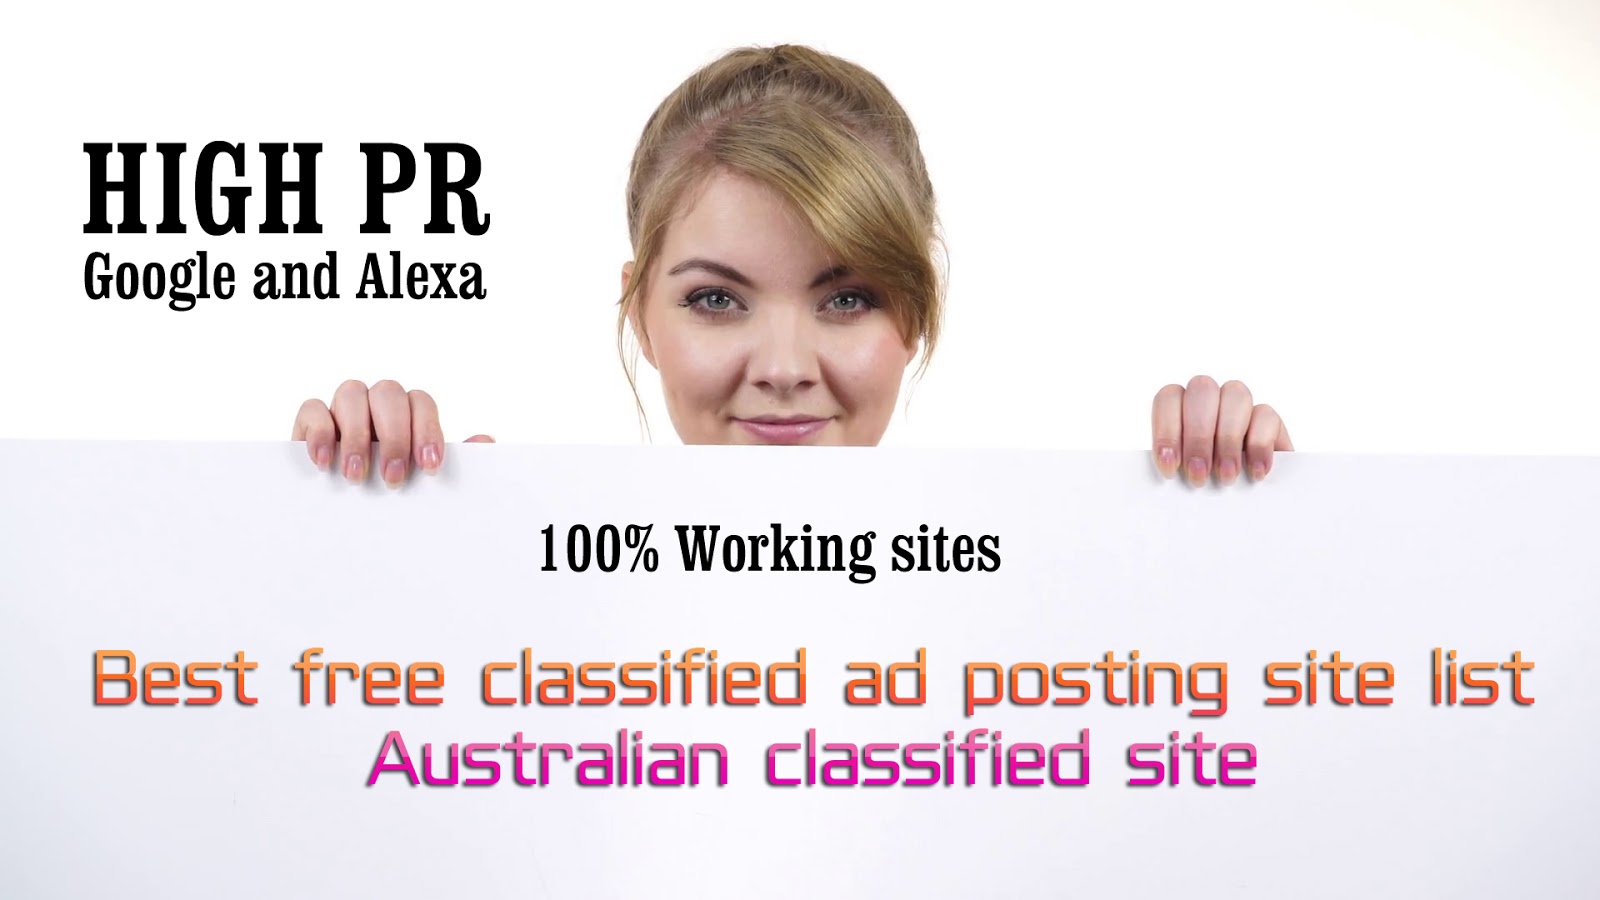 Ad posting. Classified. Classified ad pictures.